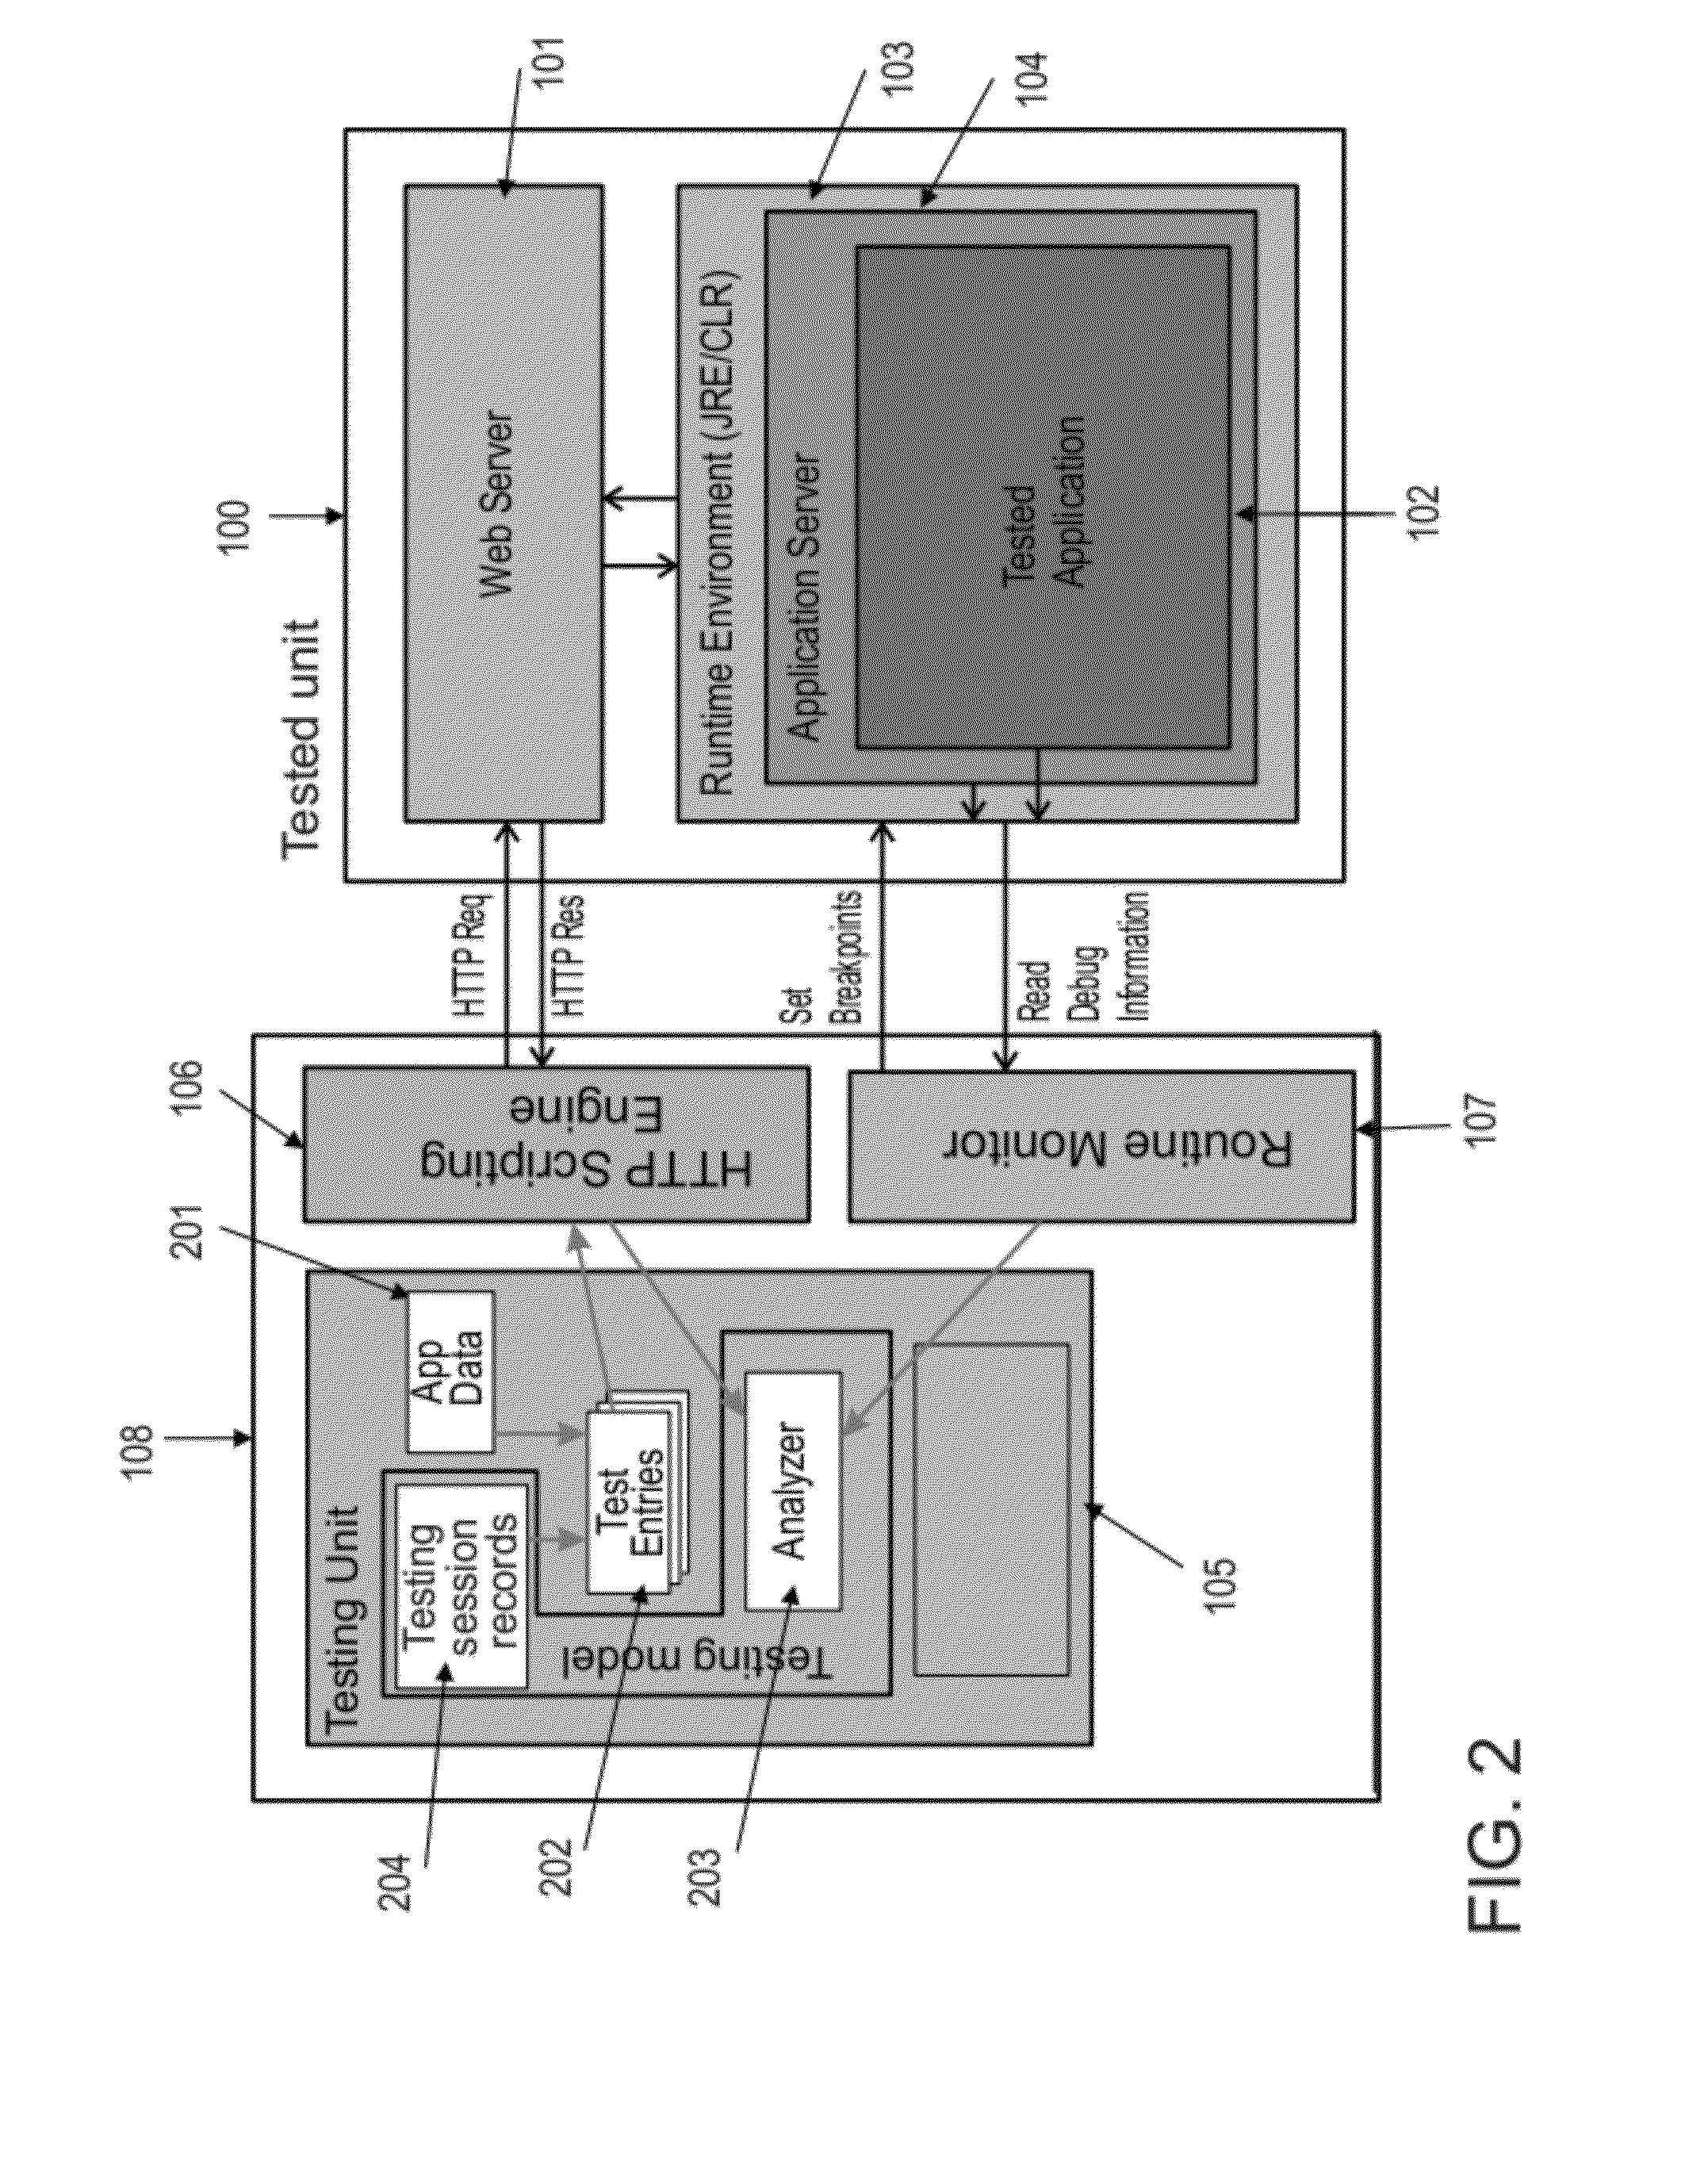 Method and system of runtime analysis